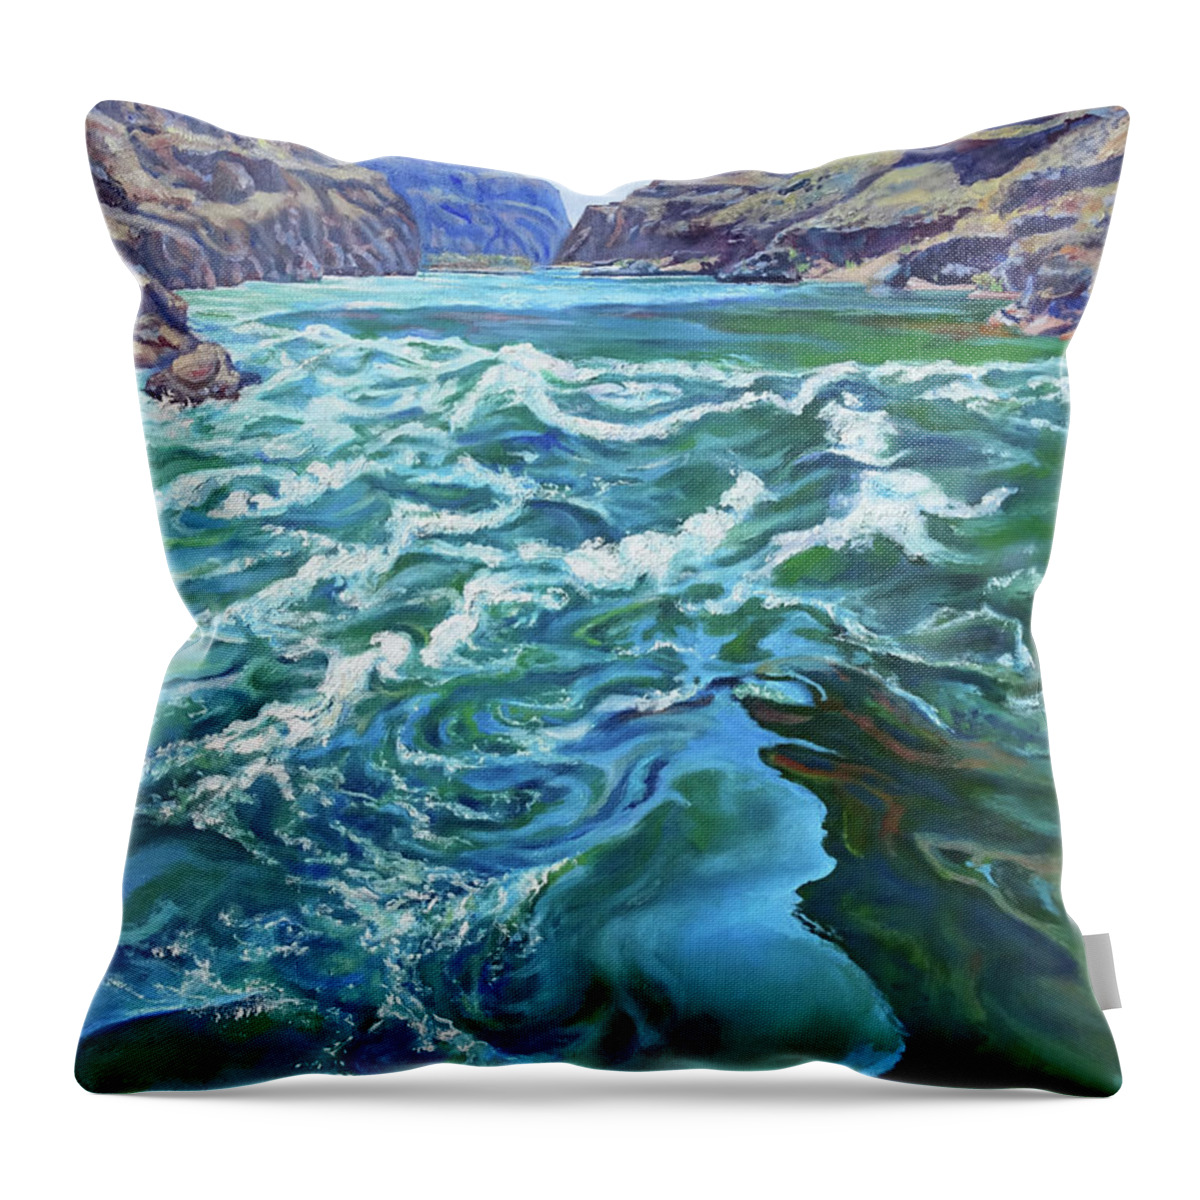 Landscape Throw Pillow featuring the painting Emerald Alley by Page Holland